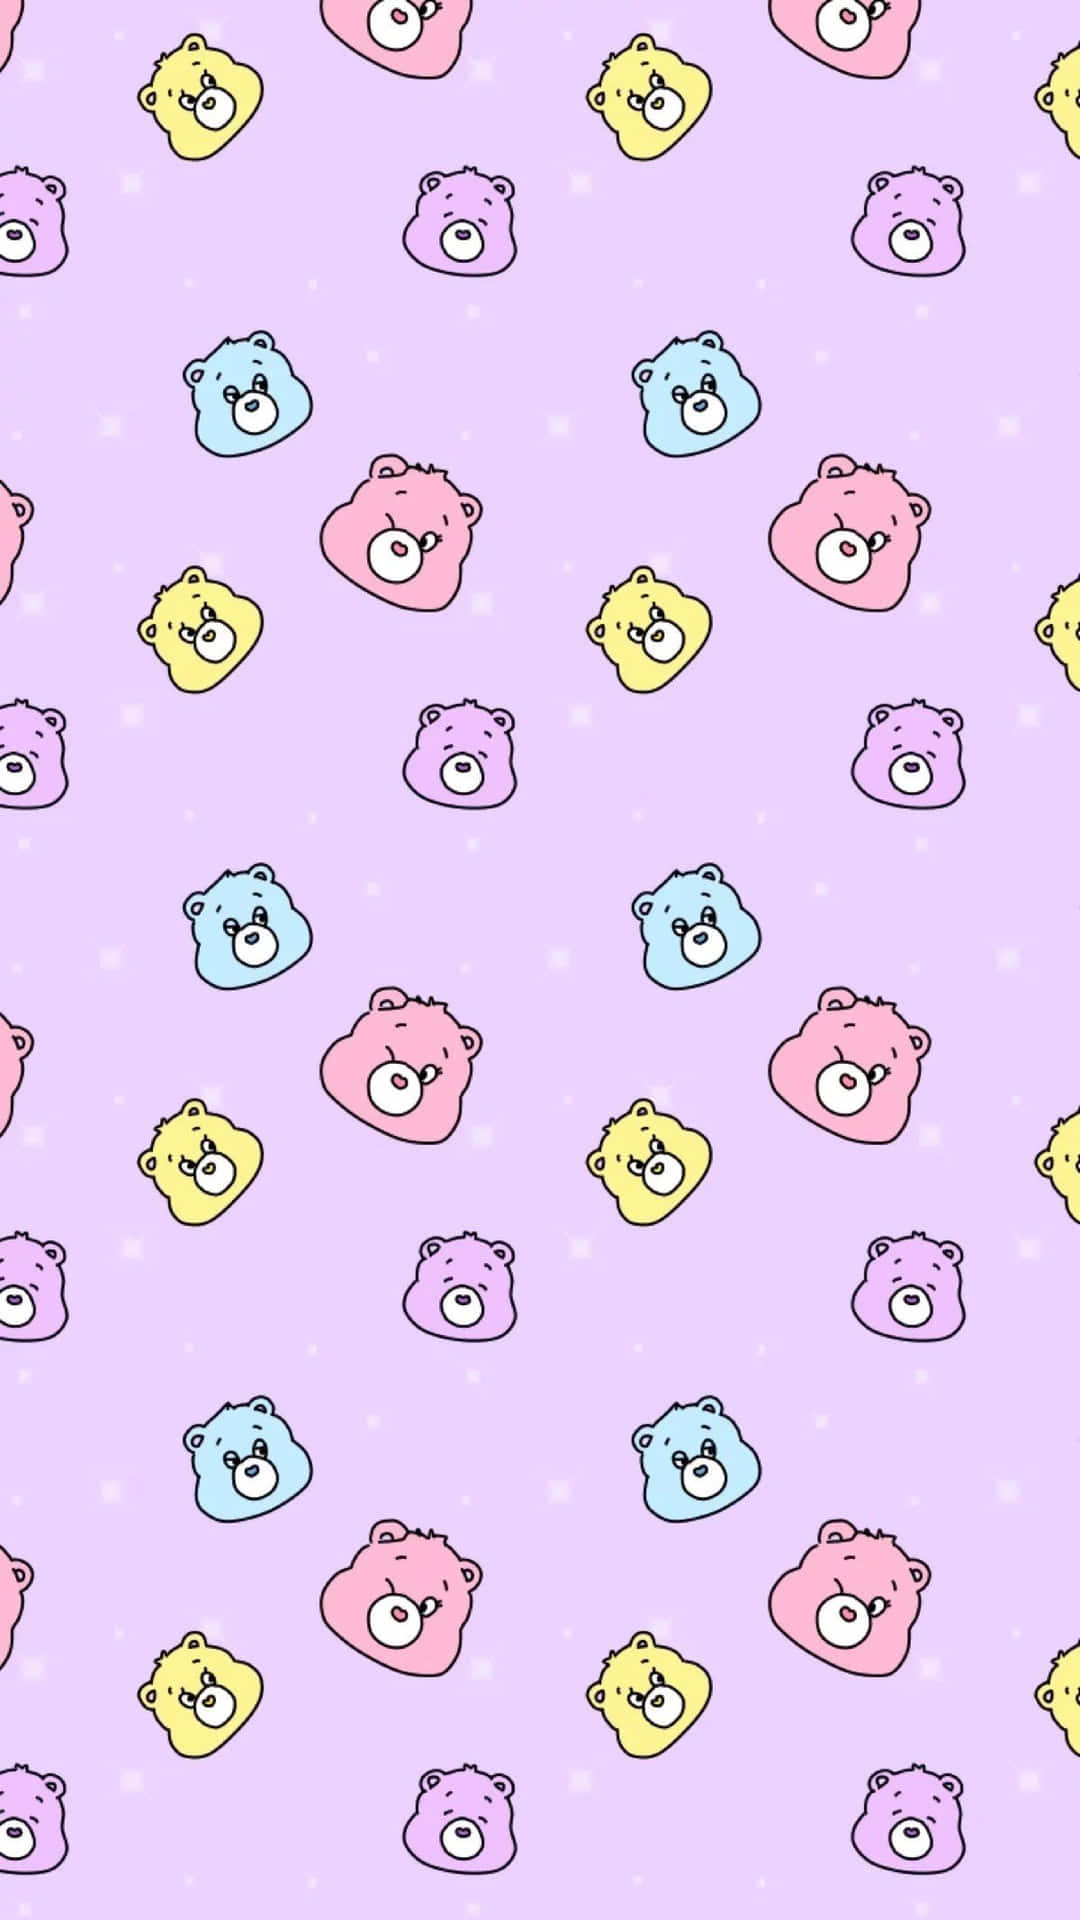 "Cuddle up with Aesthetic Care Bears and find comfort, love and joy!" Wallpaper